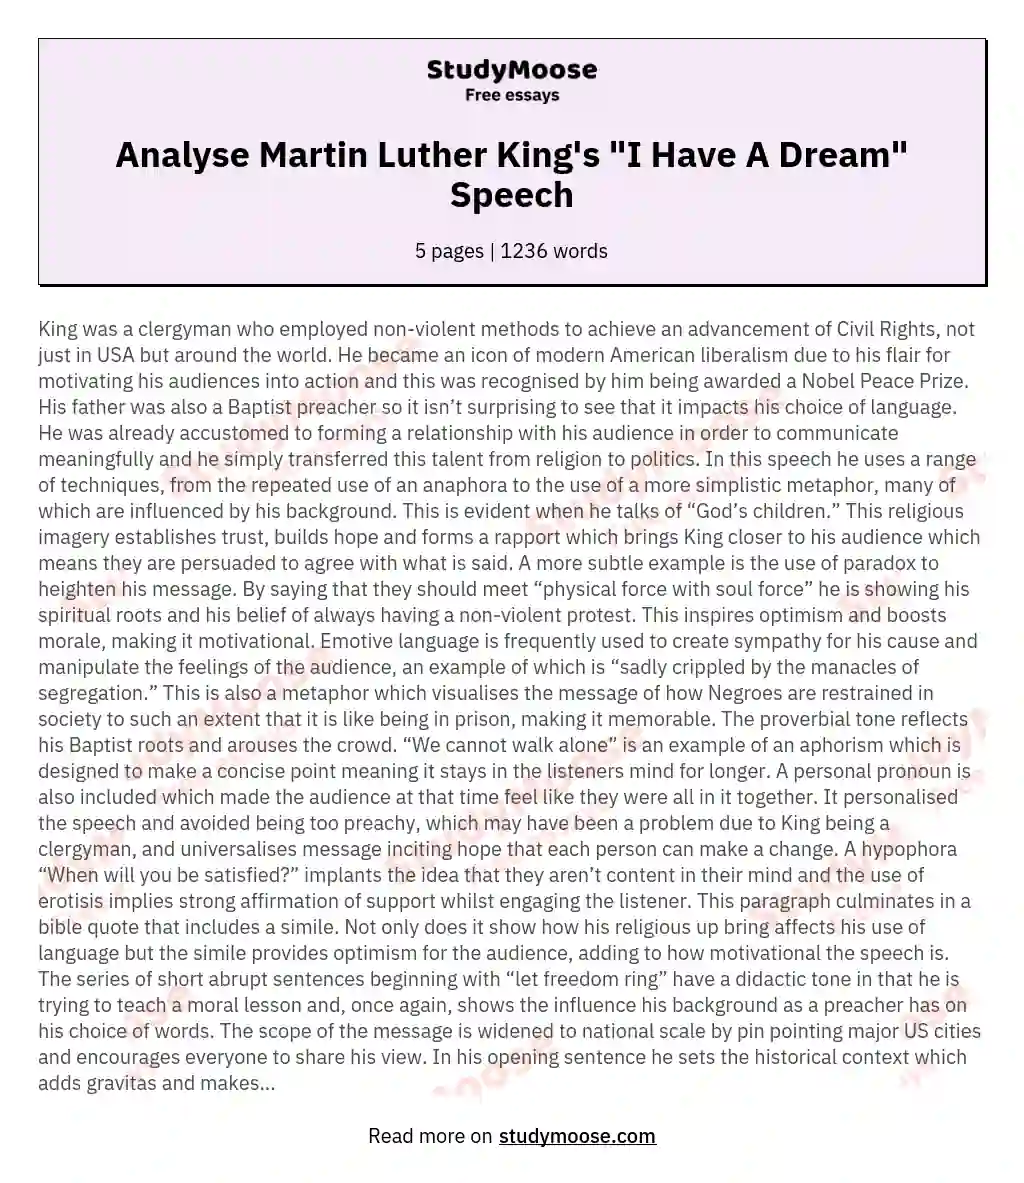 Analyse Martin Luther King's "I Have A Dream" Speech essay